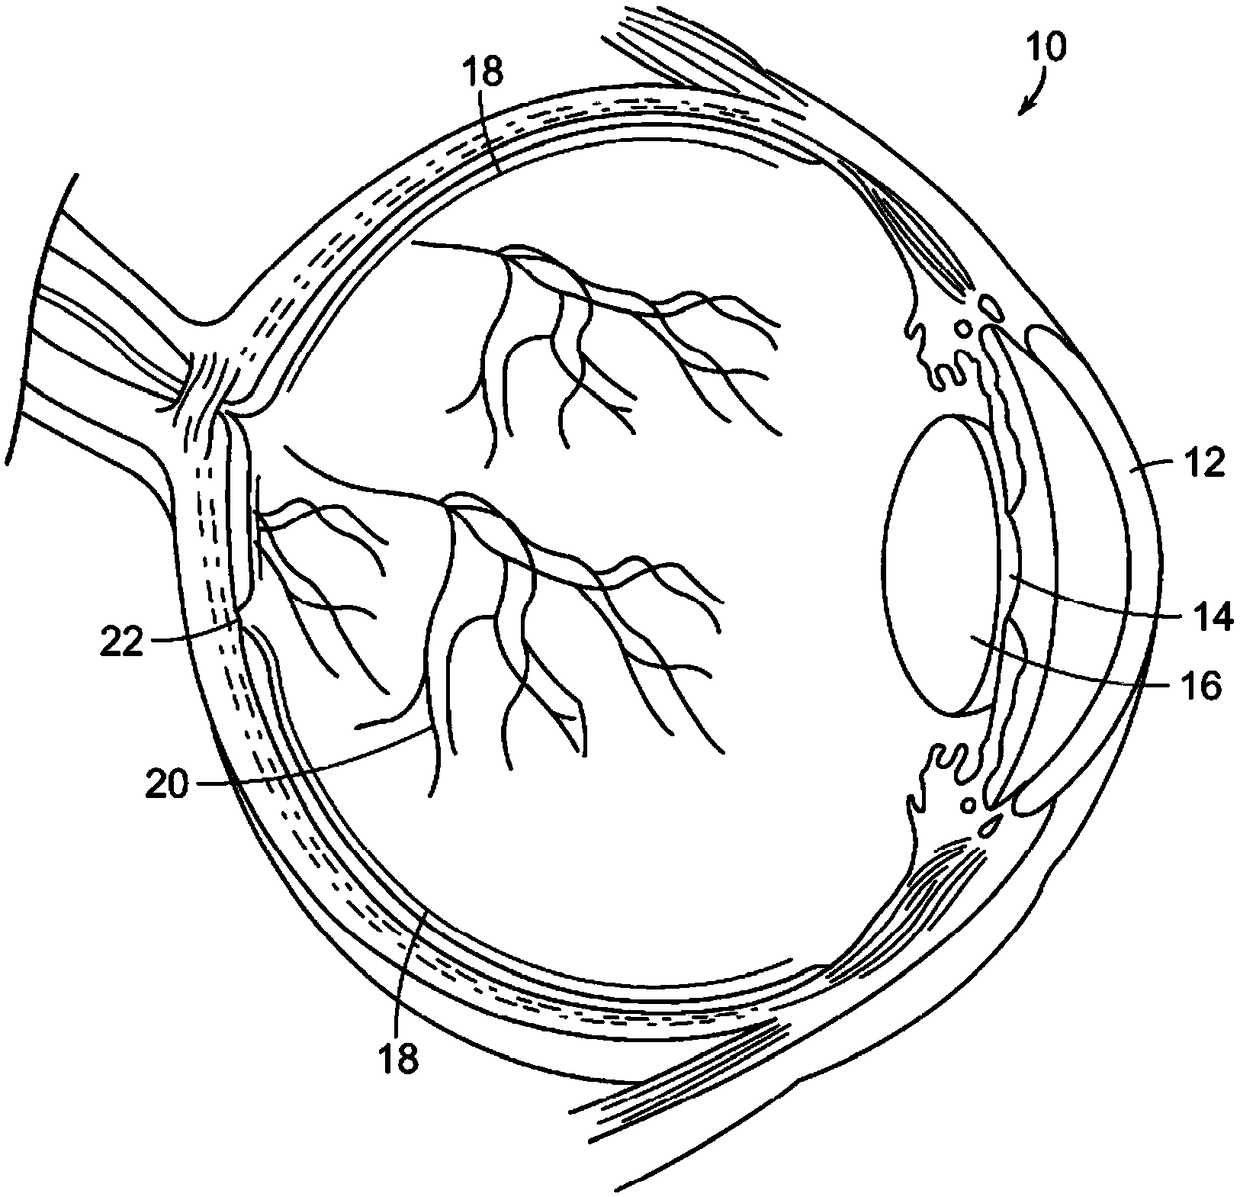 System and process for neuroprotective therapy for glaucoma